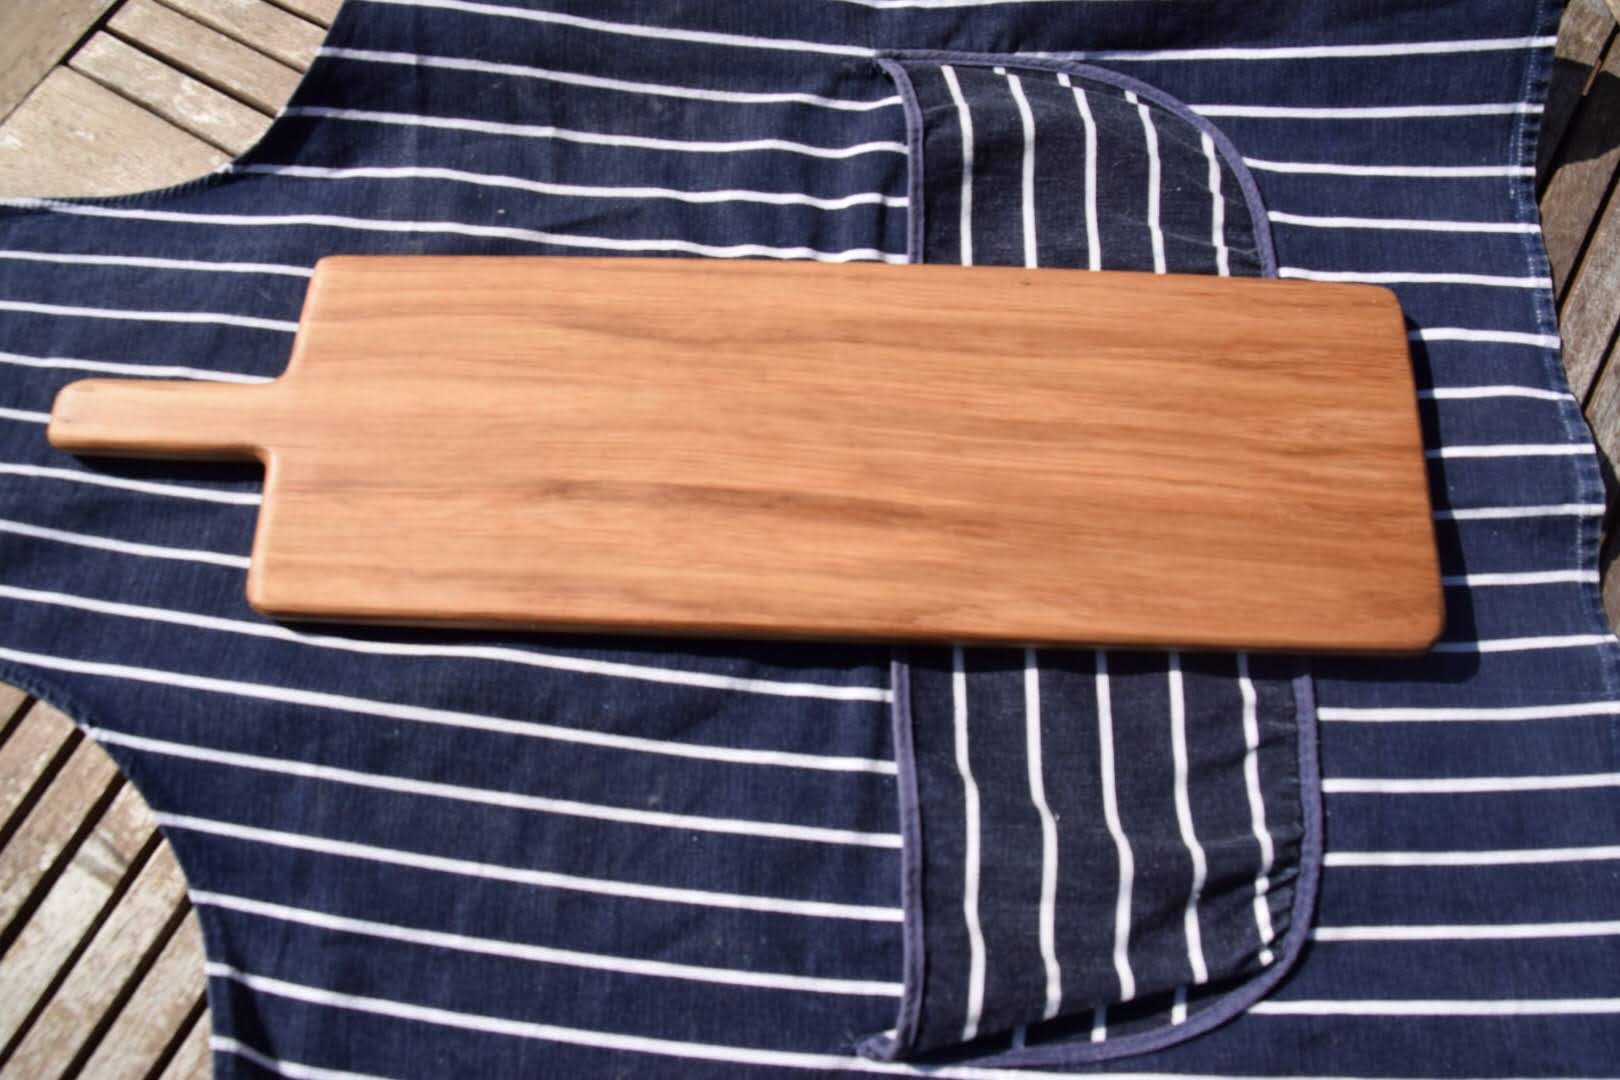 Food Safe 2 Section Serving Board Large Serving Tray Oak Cutting Board